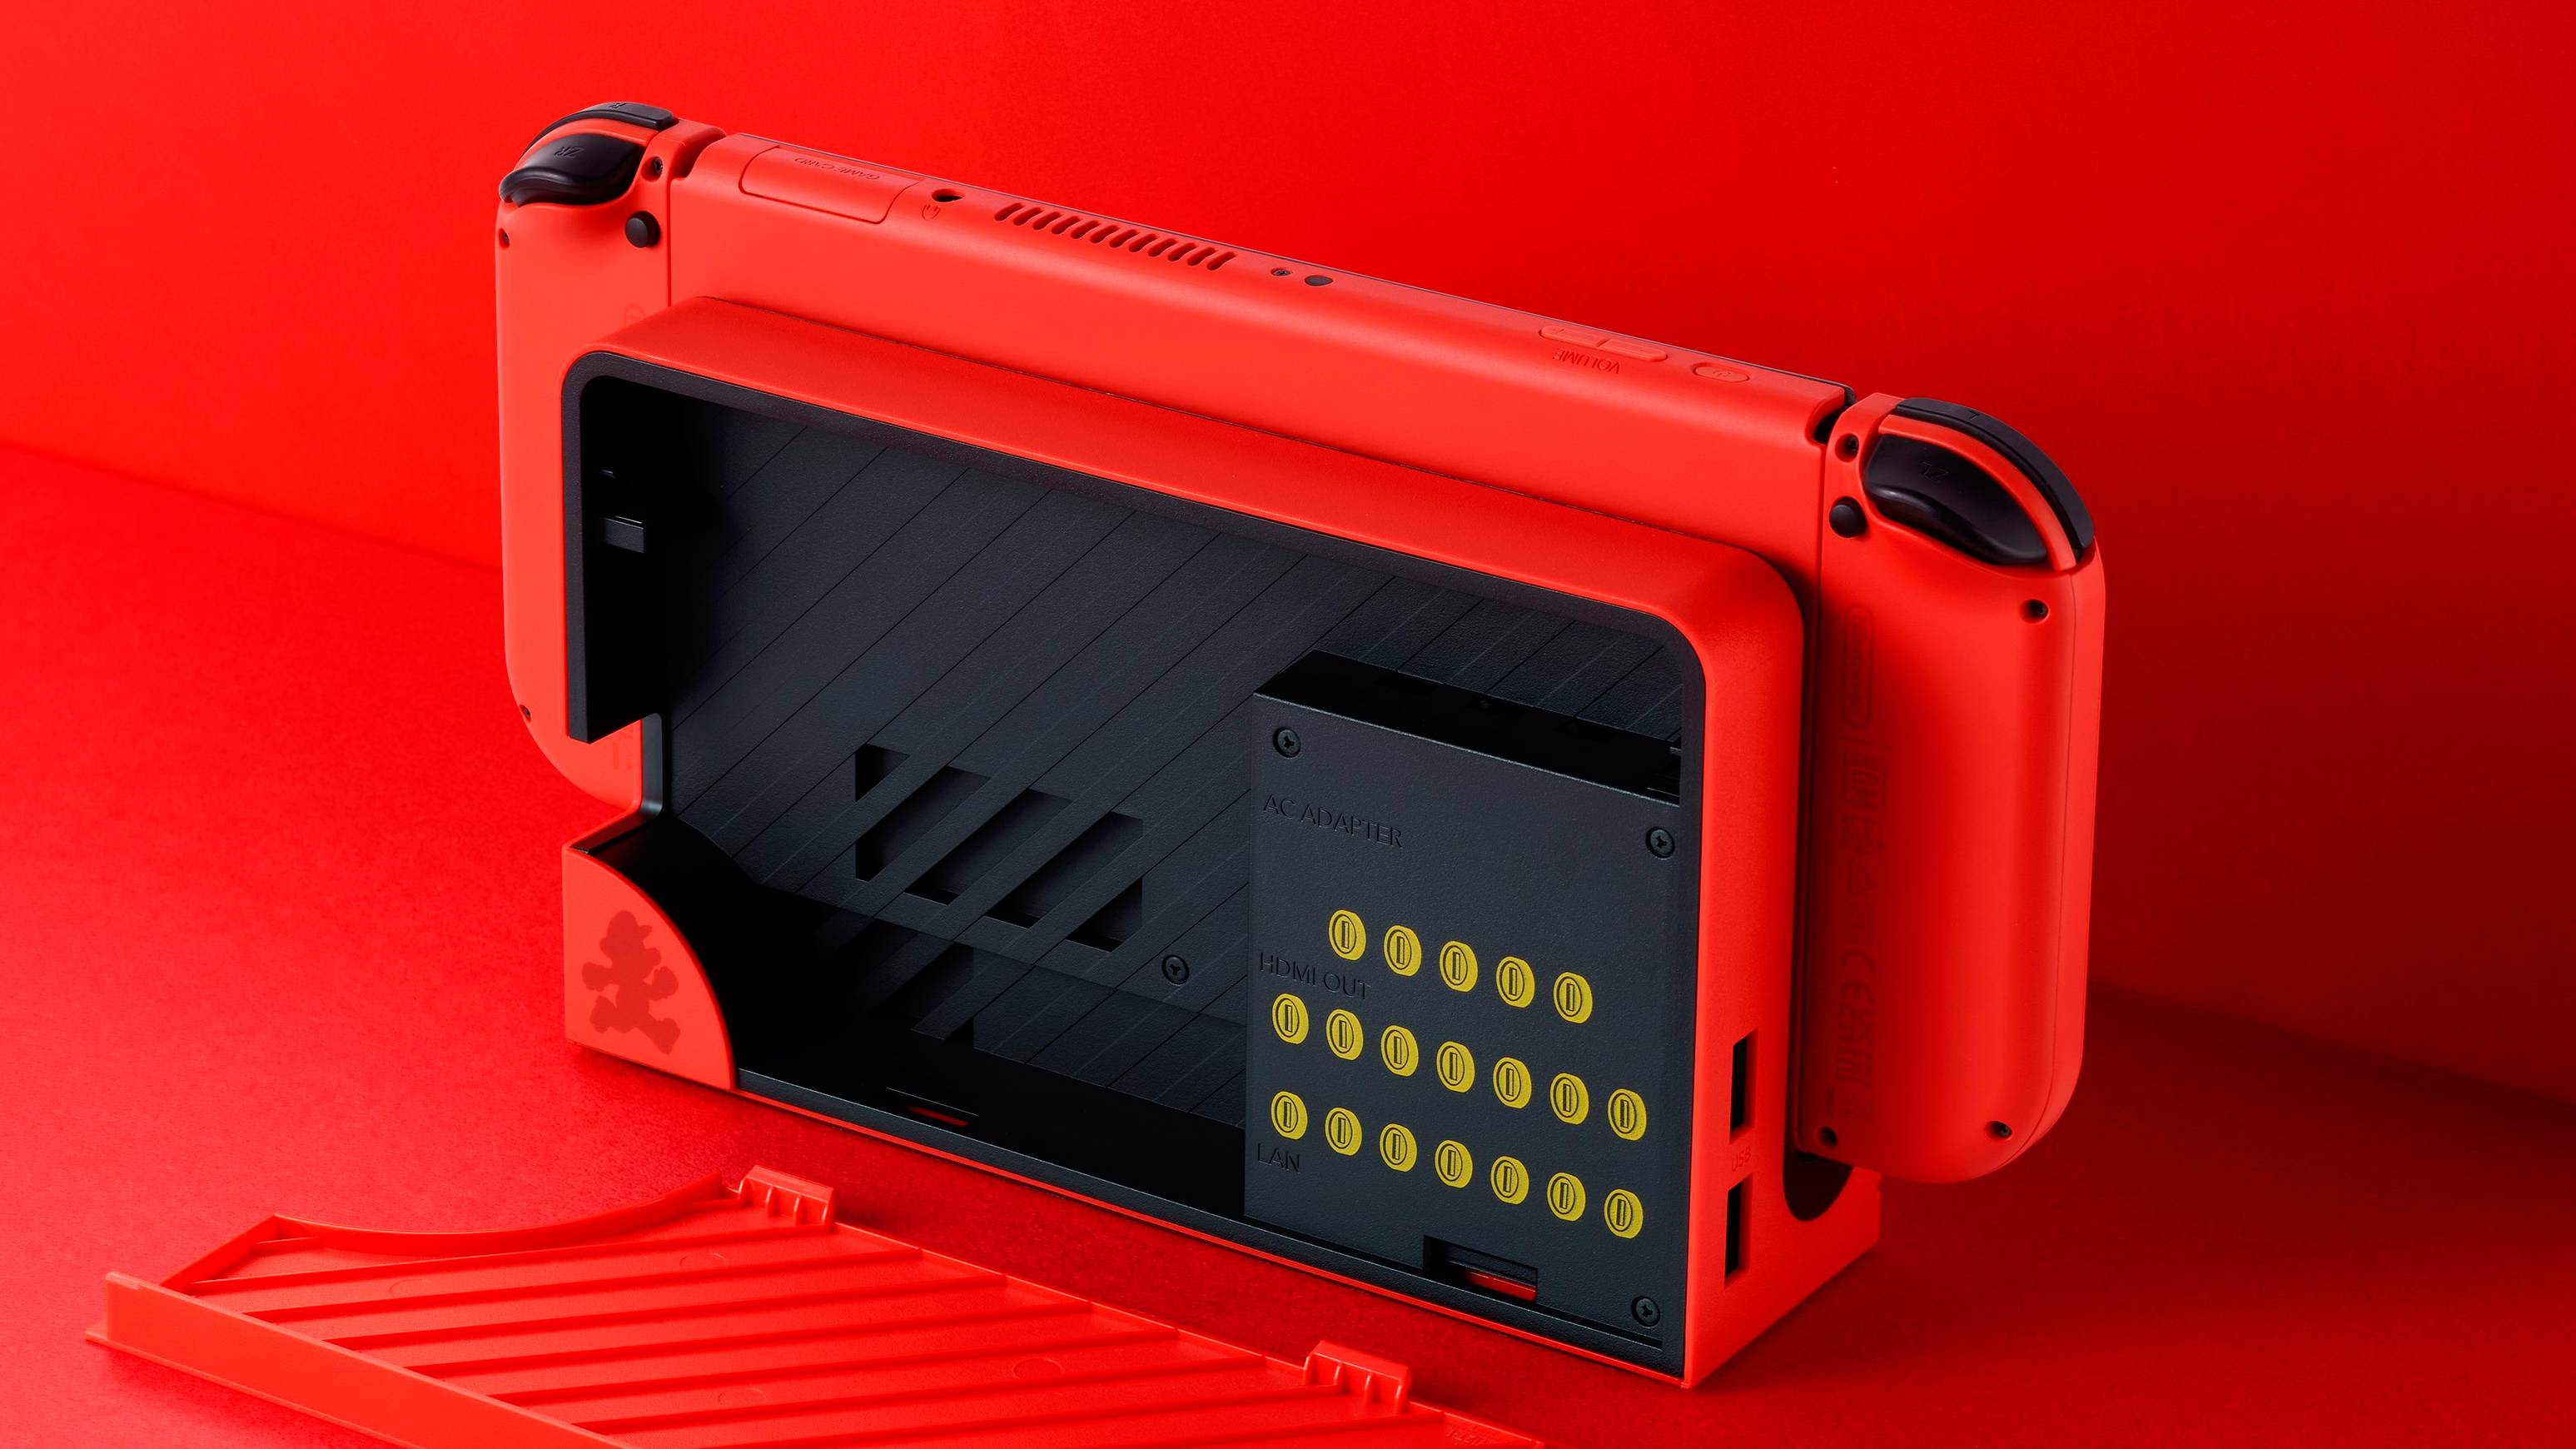 Nintendo Switch OLED Mario Red Edition: Where to pre-order | CNN Underscored